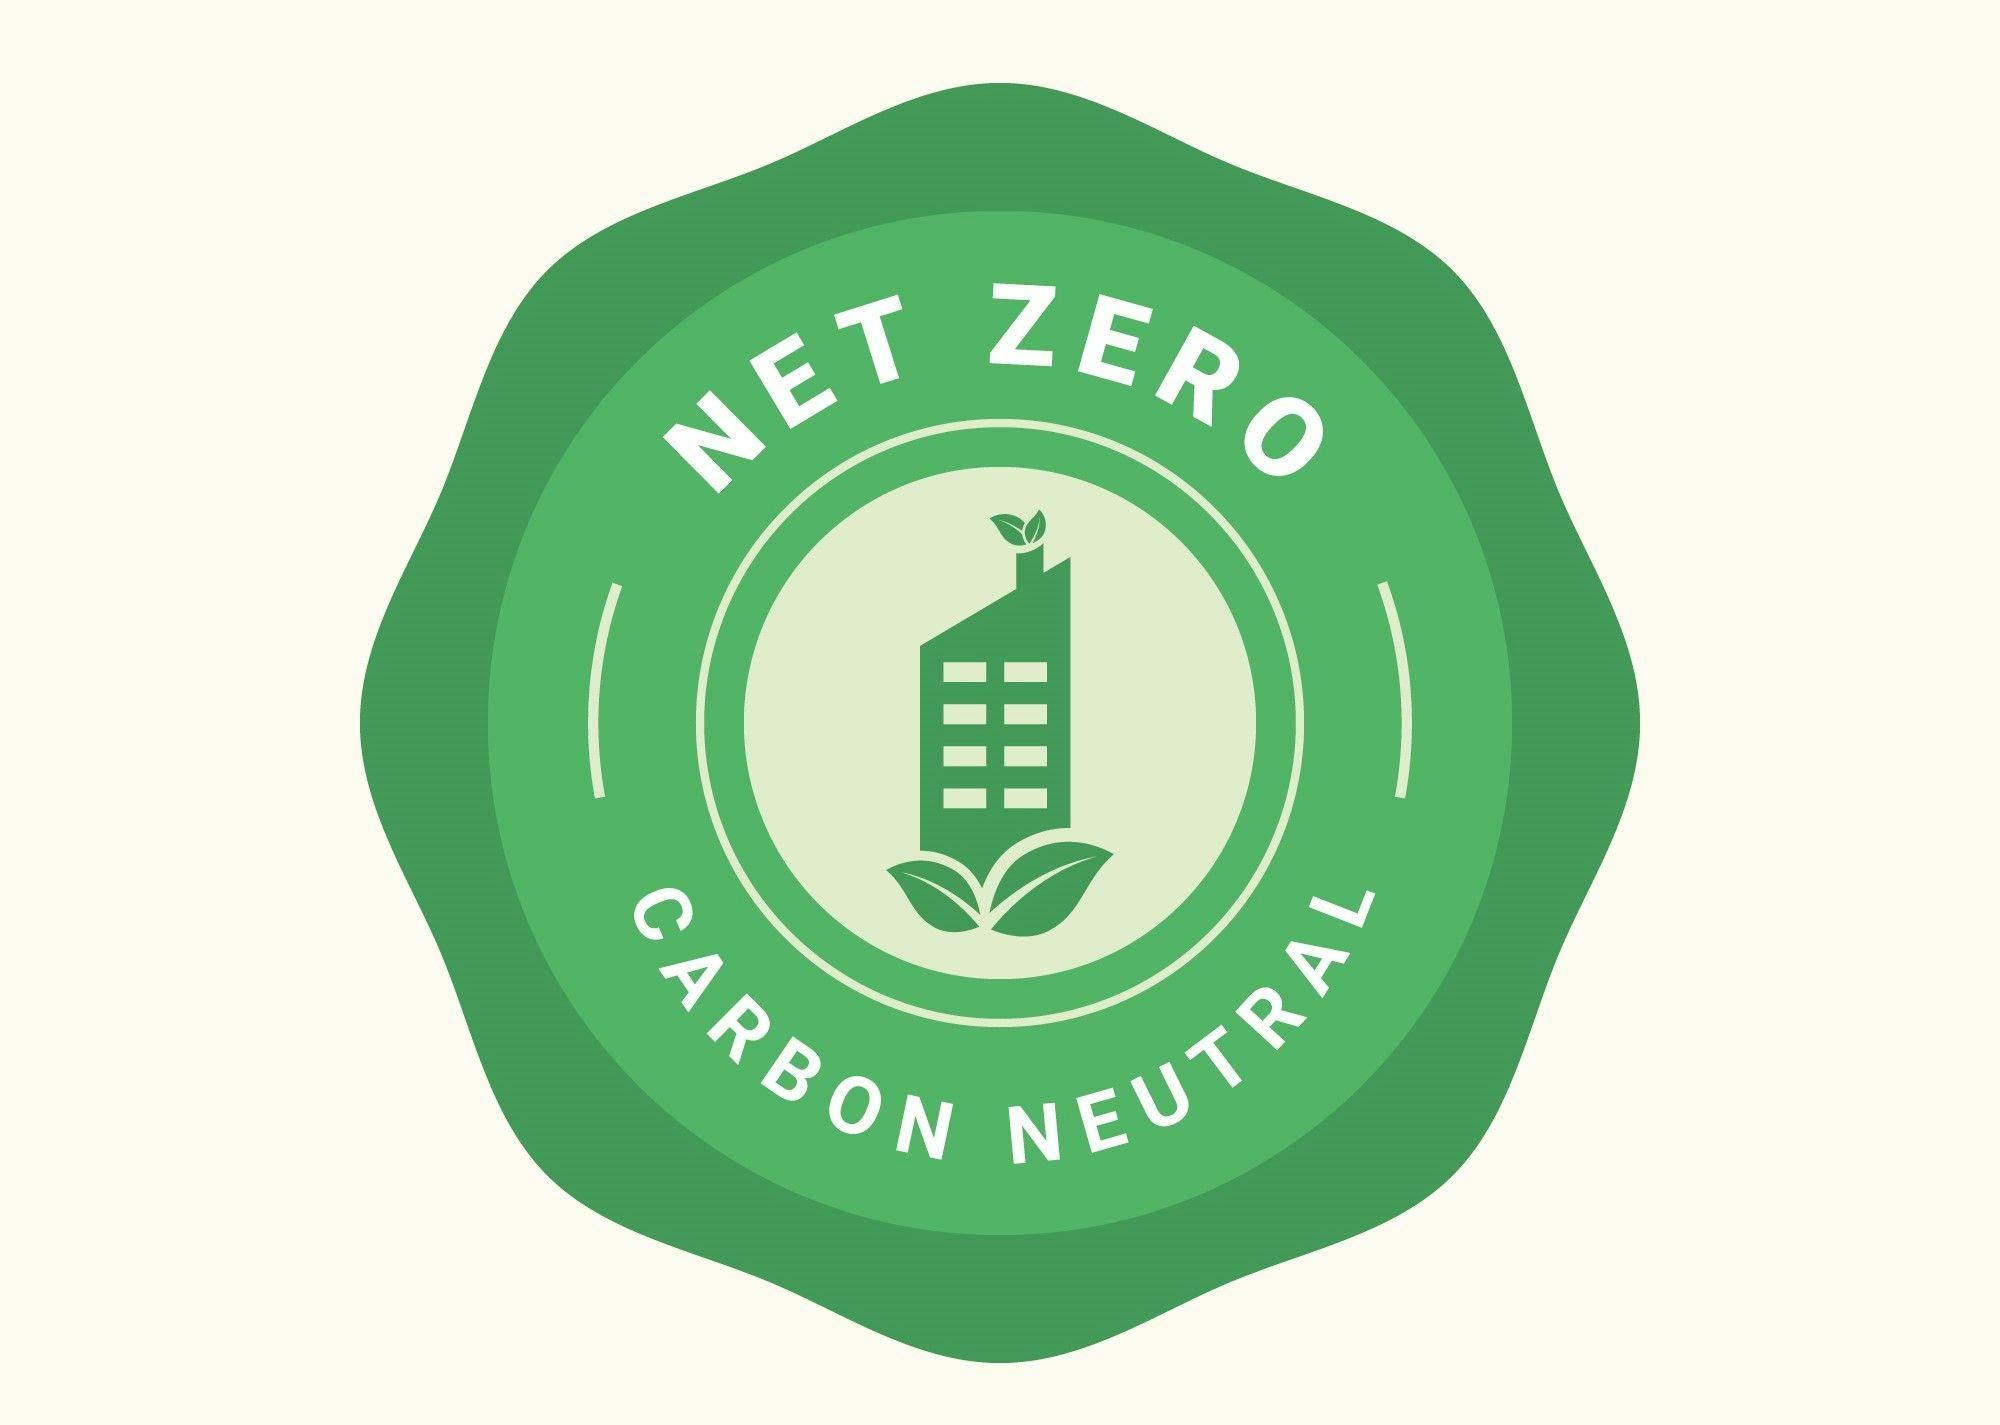 Carbon-neutral products